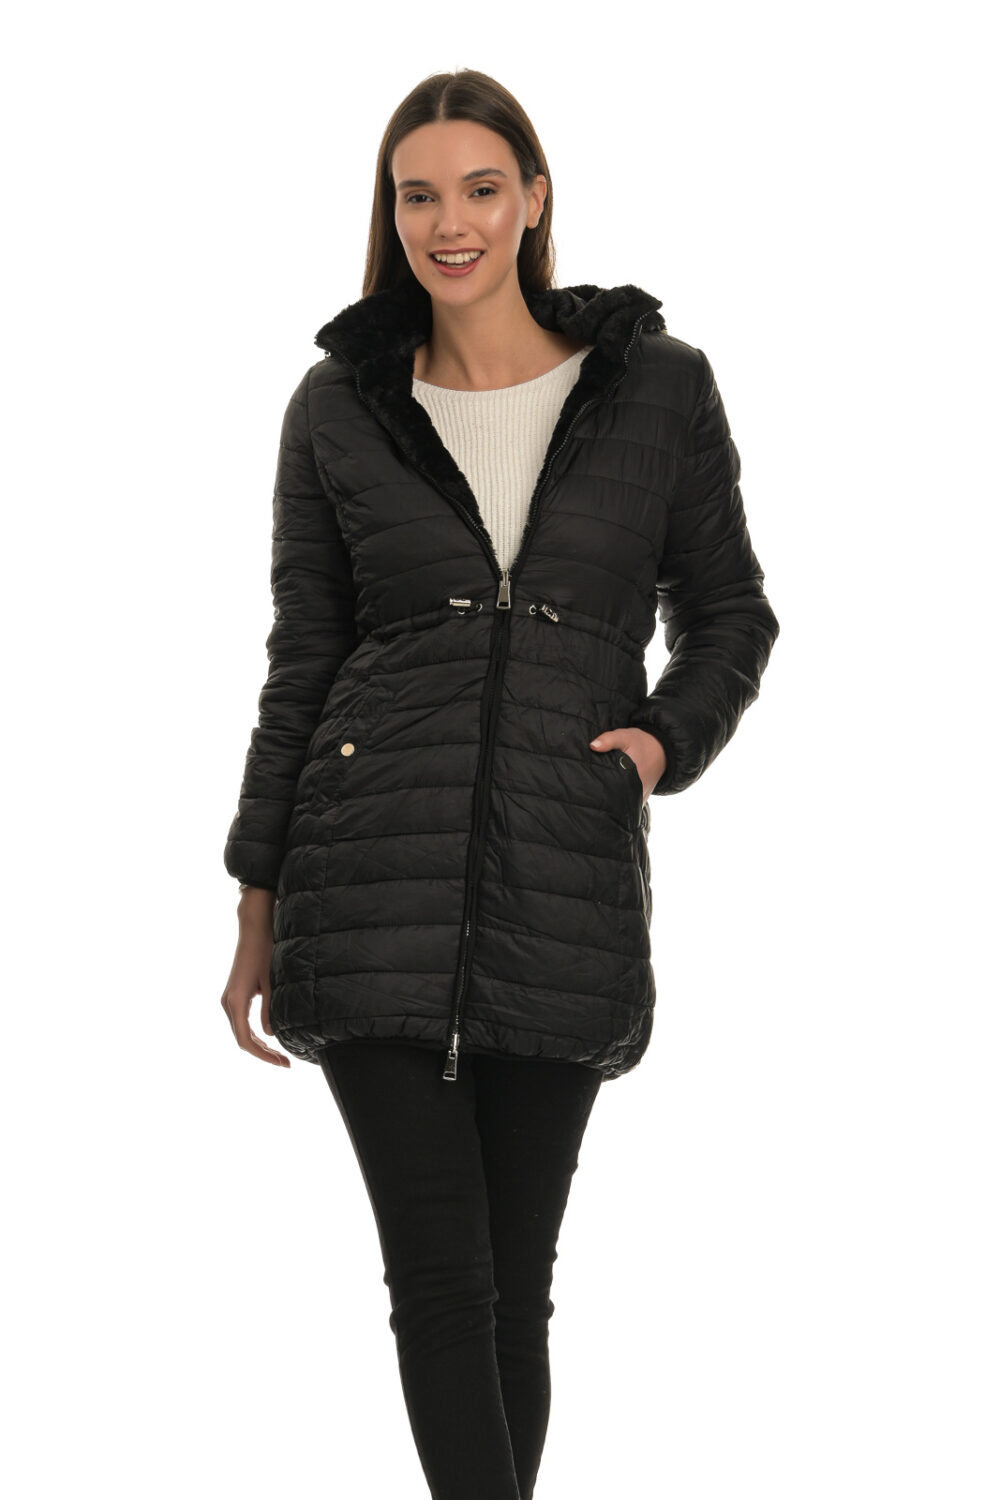 Black double-sided jacket with hood and zipper